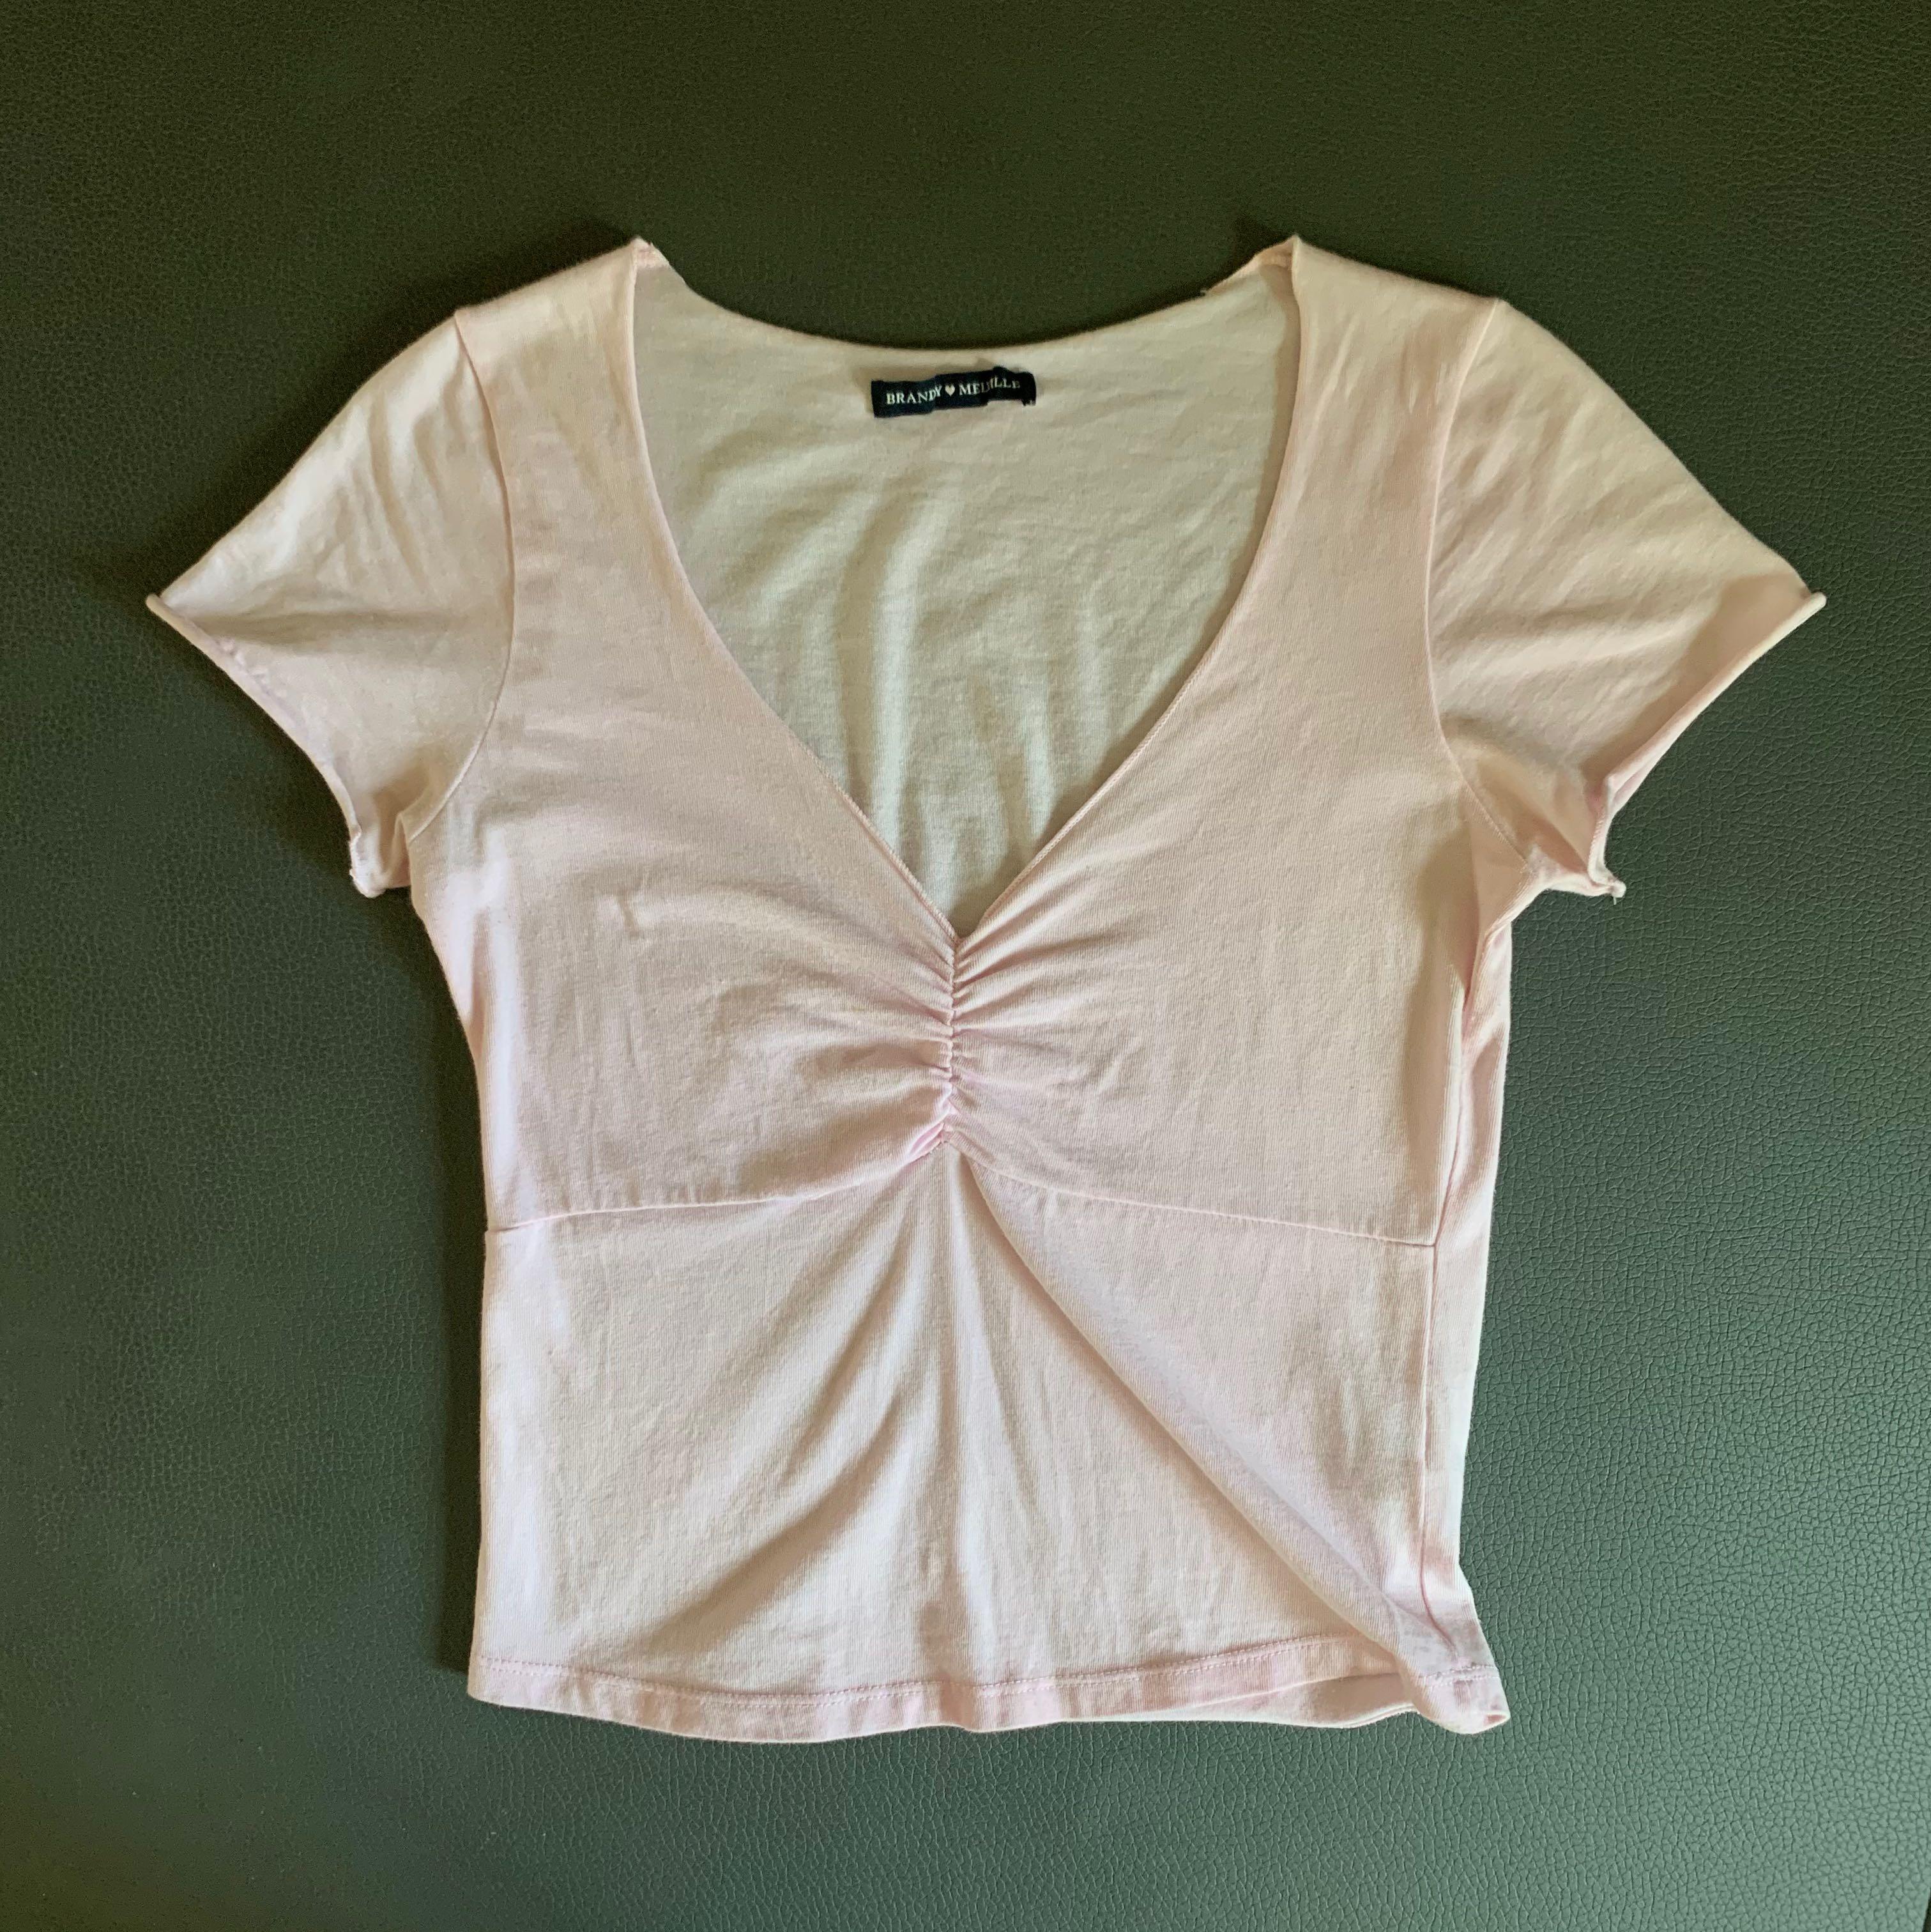 Brandy Melville Pink Gina Top Women S Fashion Clothes Tops On Carousell